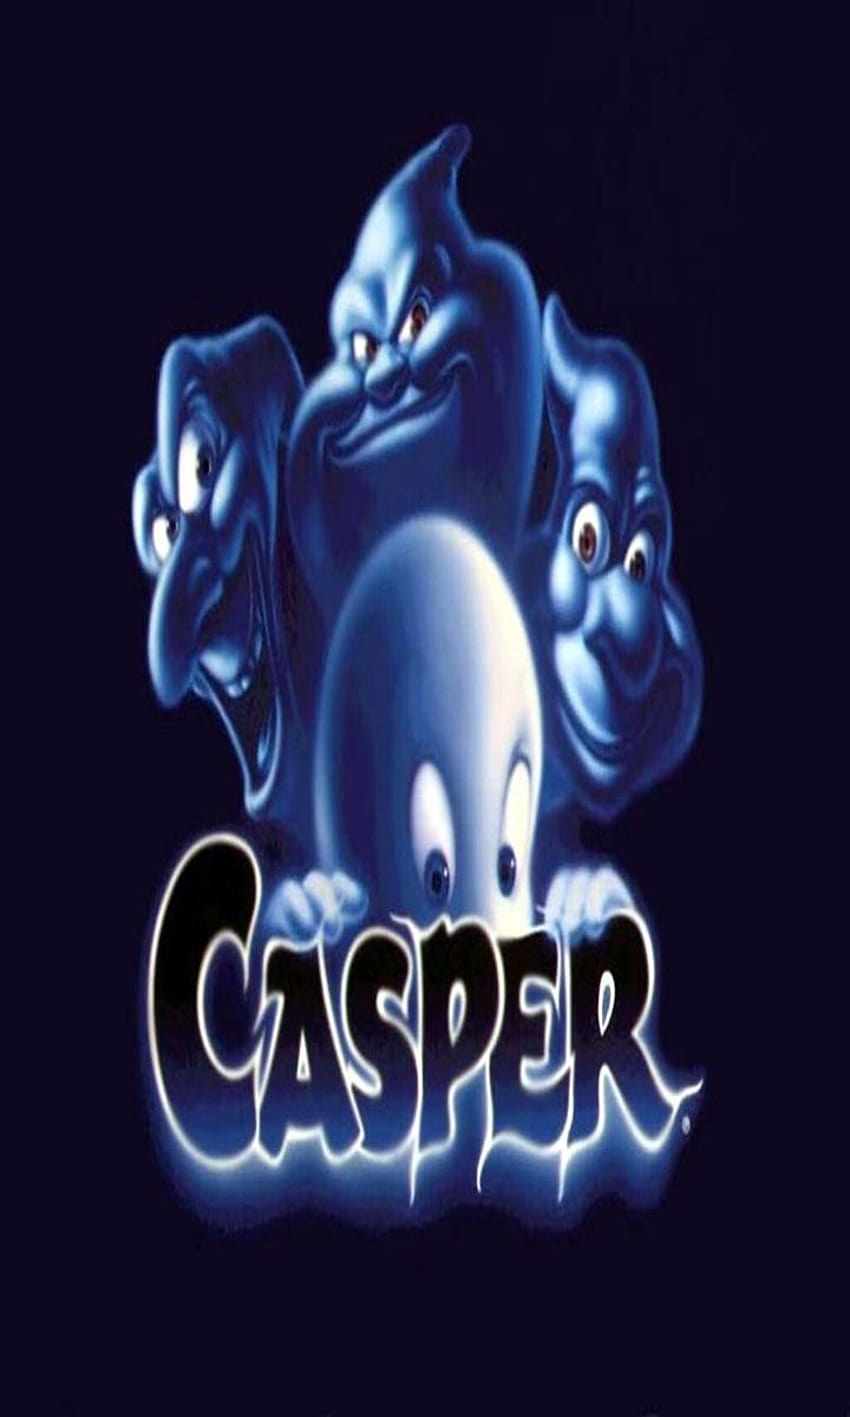 Download wallpapers Casper 4k wallpapers with names Casper name blue  neon lights Happy Birthday Casper popular dutch male names picture with  Casper name for desktop with resolution 3840x2400 High Quality HD pictures